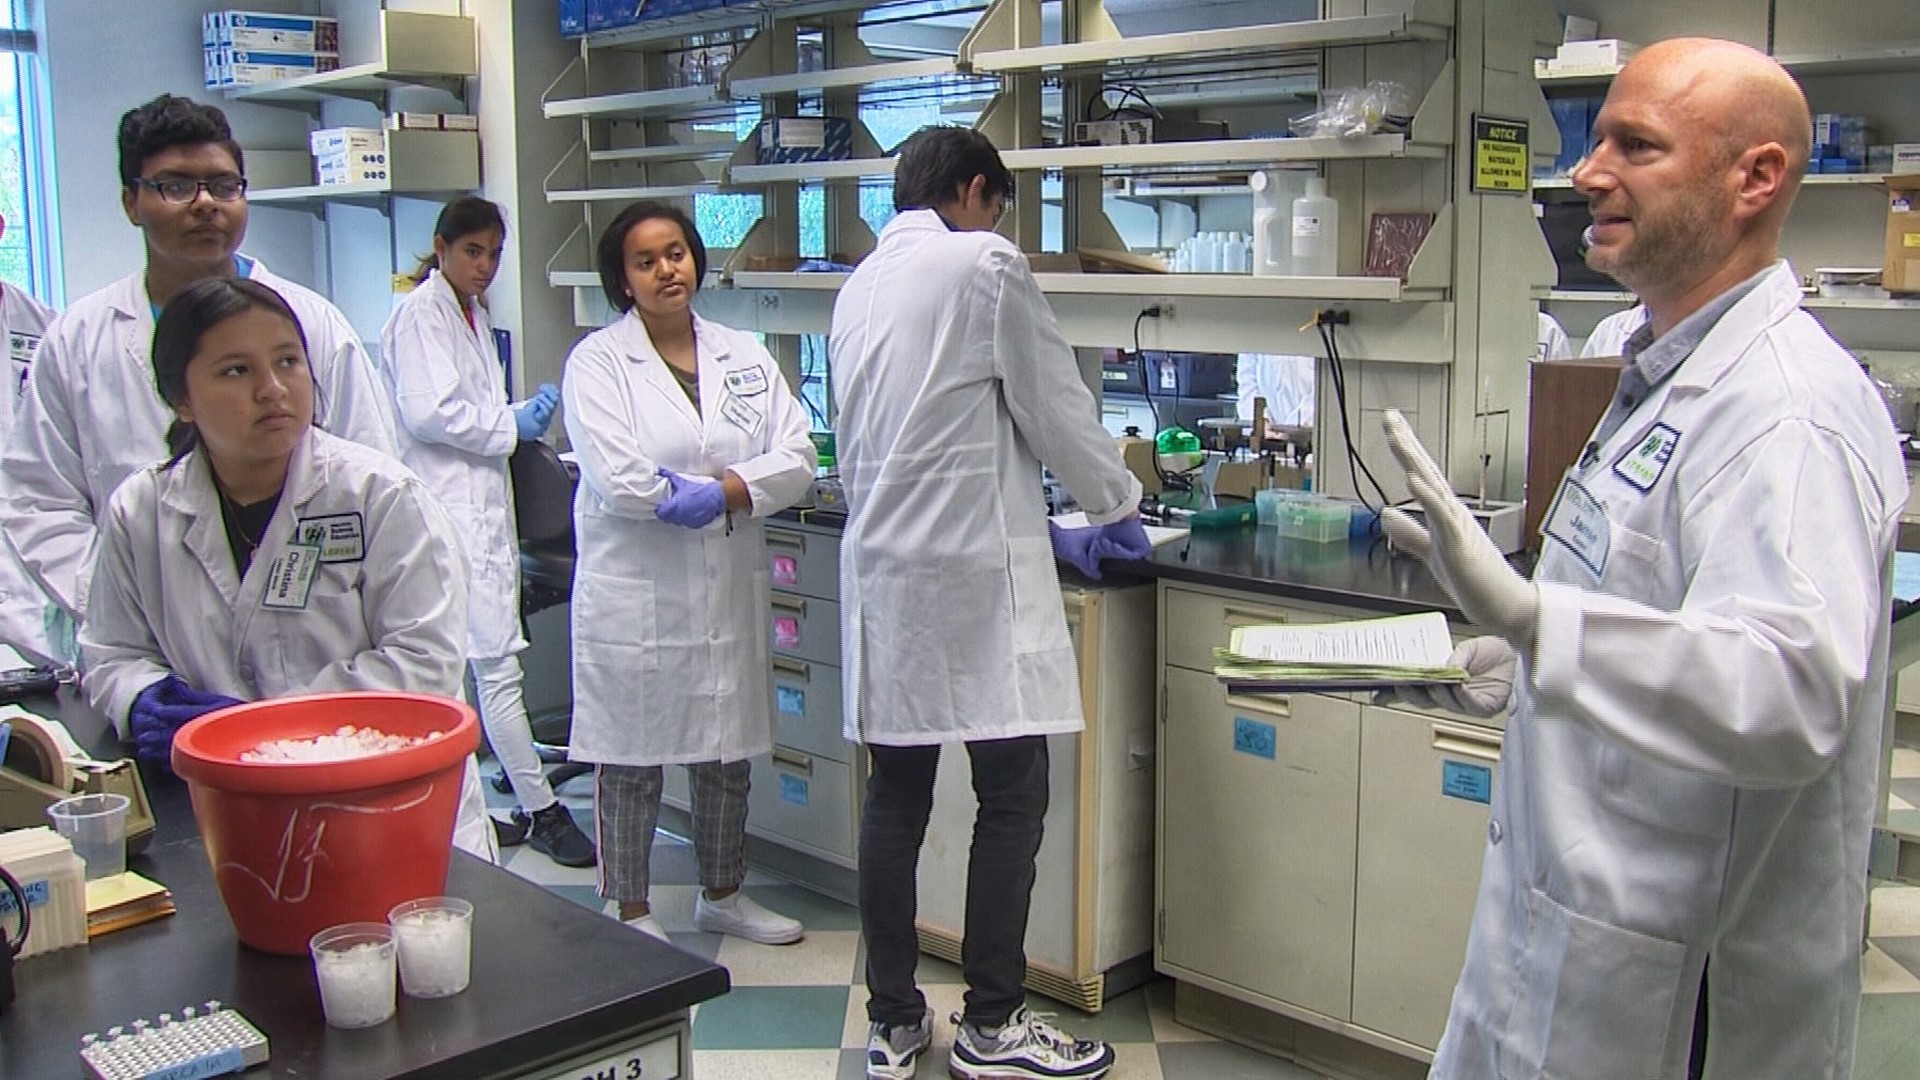 The two-week immersion offers students a unique experience inside a world-class cancer research center. Sponsored by Fred Hutch.